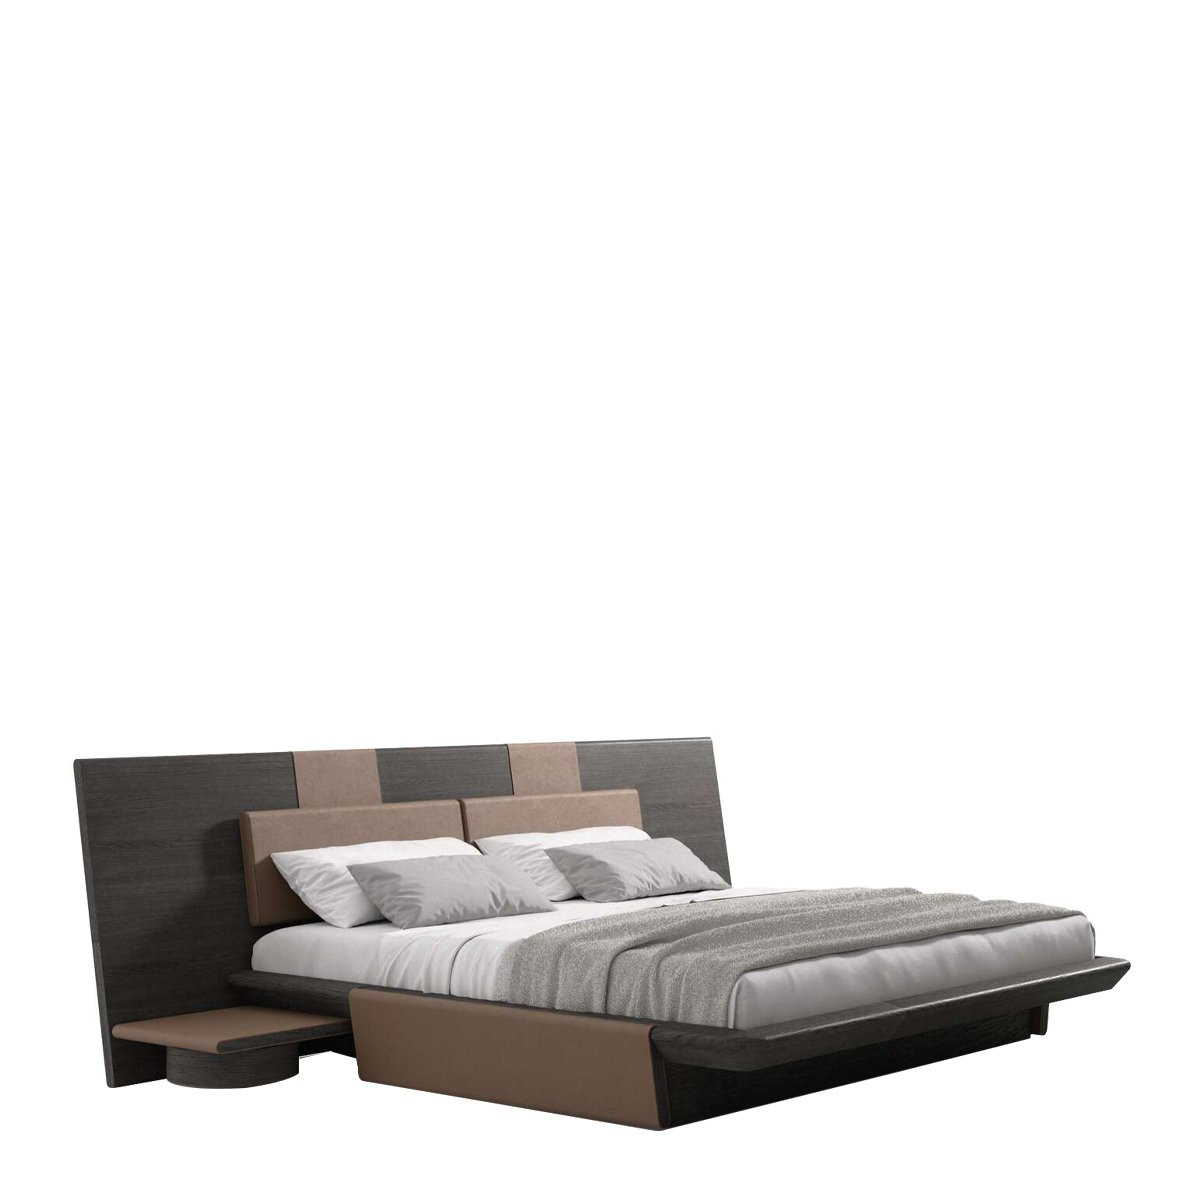 Cassina Acute Bed